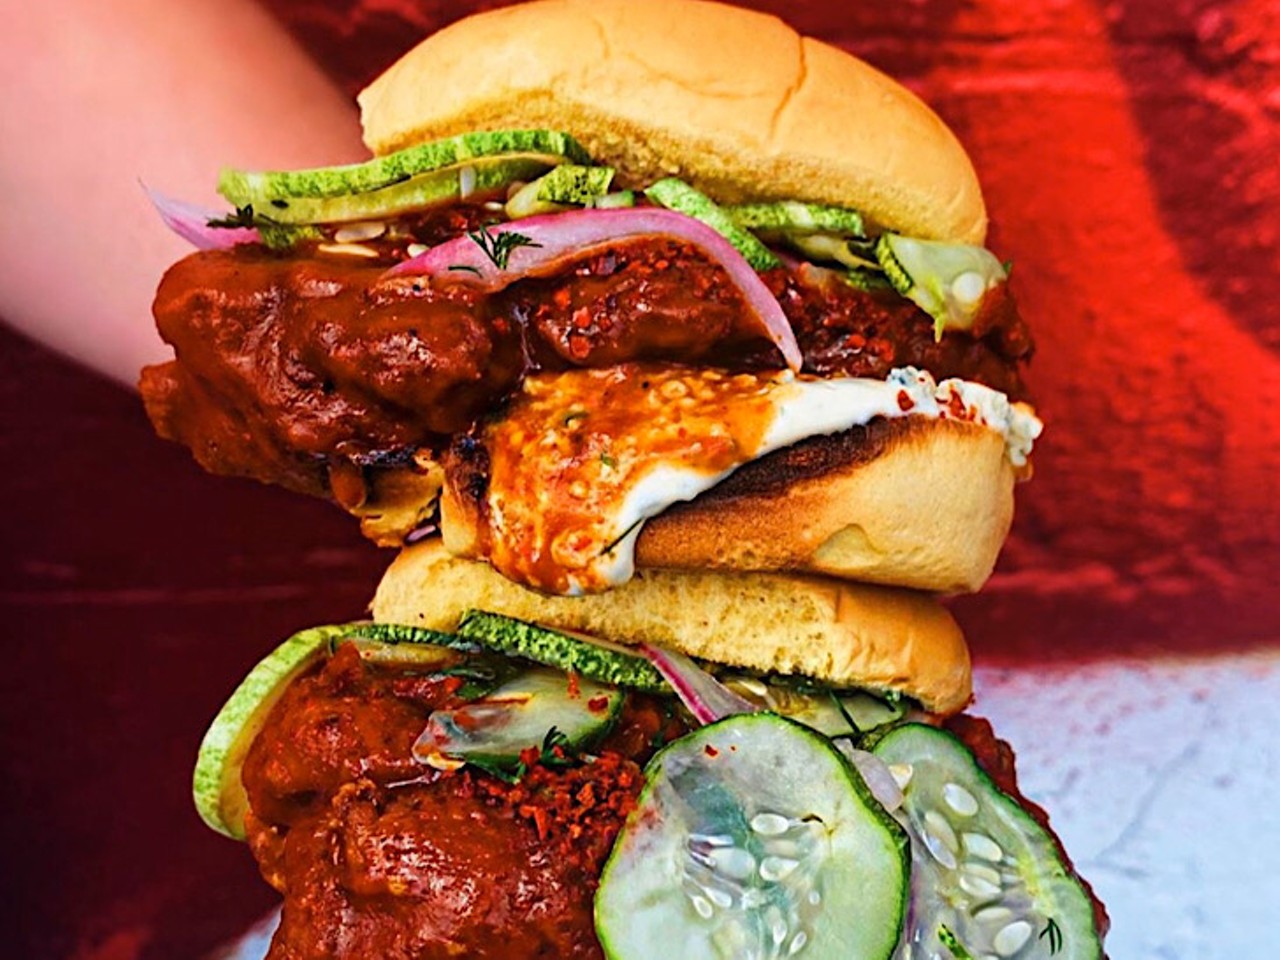 Fork and Hen
1701 N Franklin St, Tampa, FL
Feeling fancy and kind of adventurous? Their version of the chicken sandwich comes with a plethora of toppings, with &#147;house sambal, tarragon aioli, lavender sorghum, farm pickles&#148; as their listing under the menu. 
Photo via Fork and Hen/Instagram